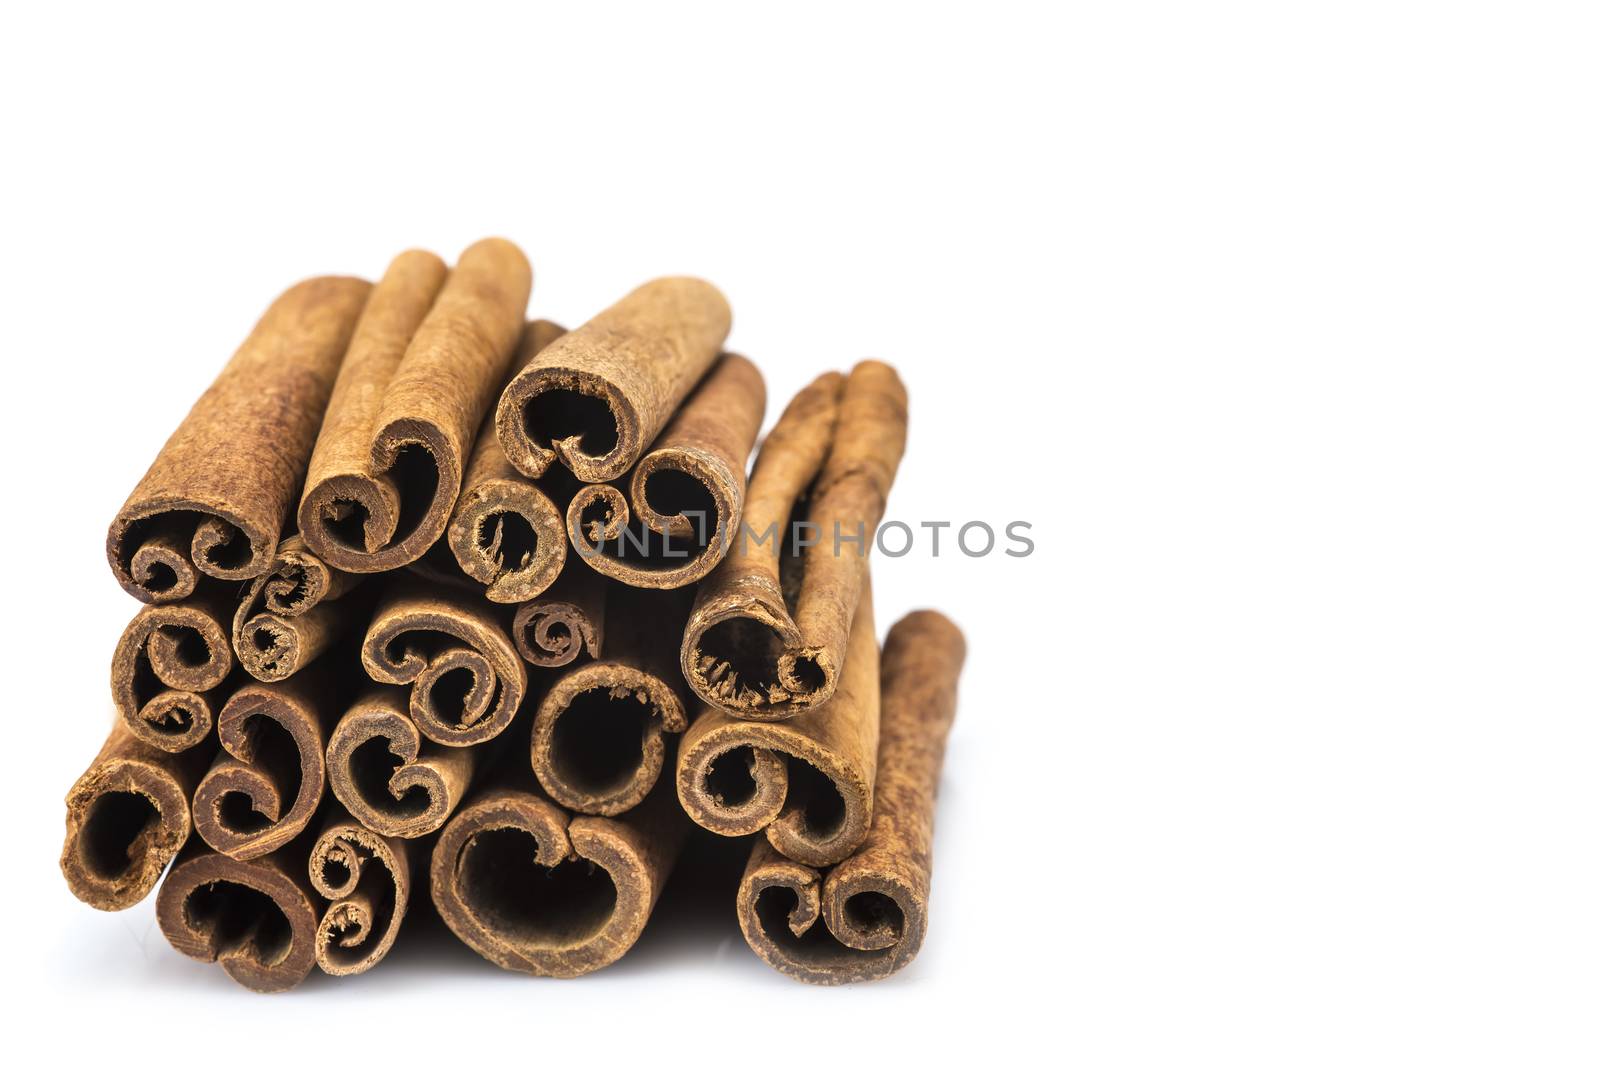 Cinnamon on a white background by angelsimon